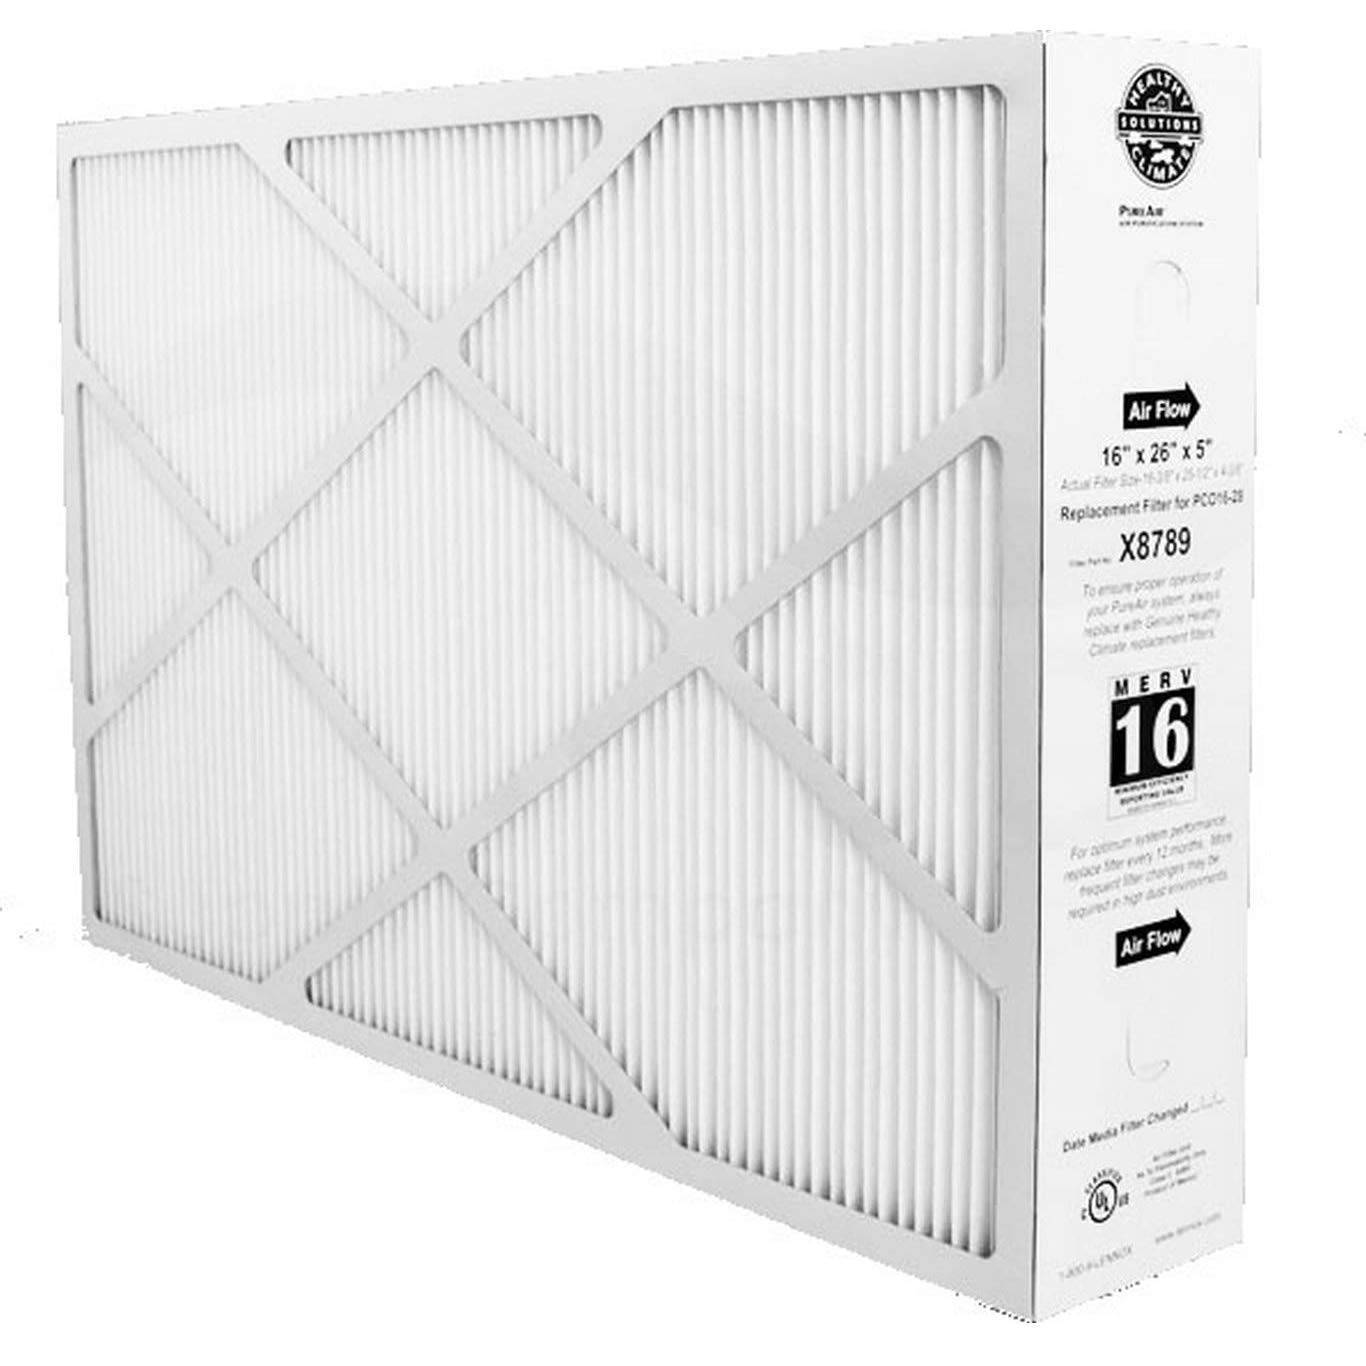 X8789 Filters Fast® Replacement for Lennox X8789 26x16x5 MERV 16 Furnace & AC Air Filter